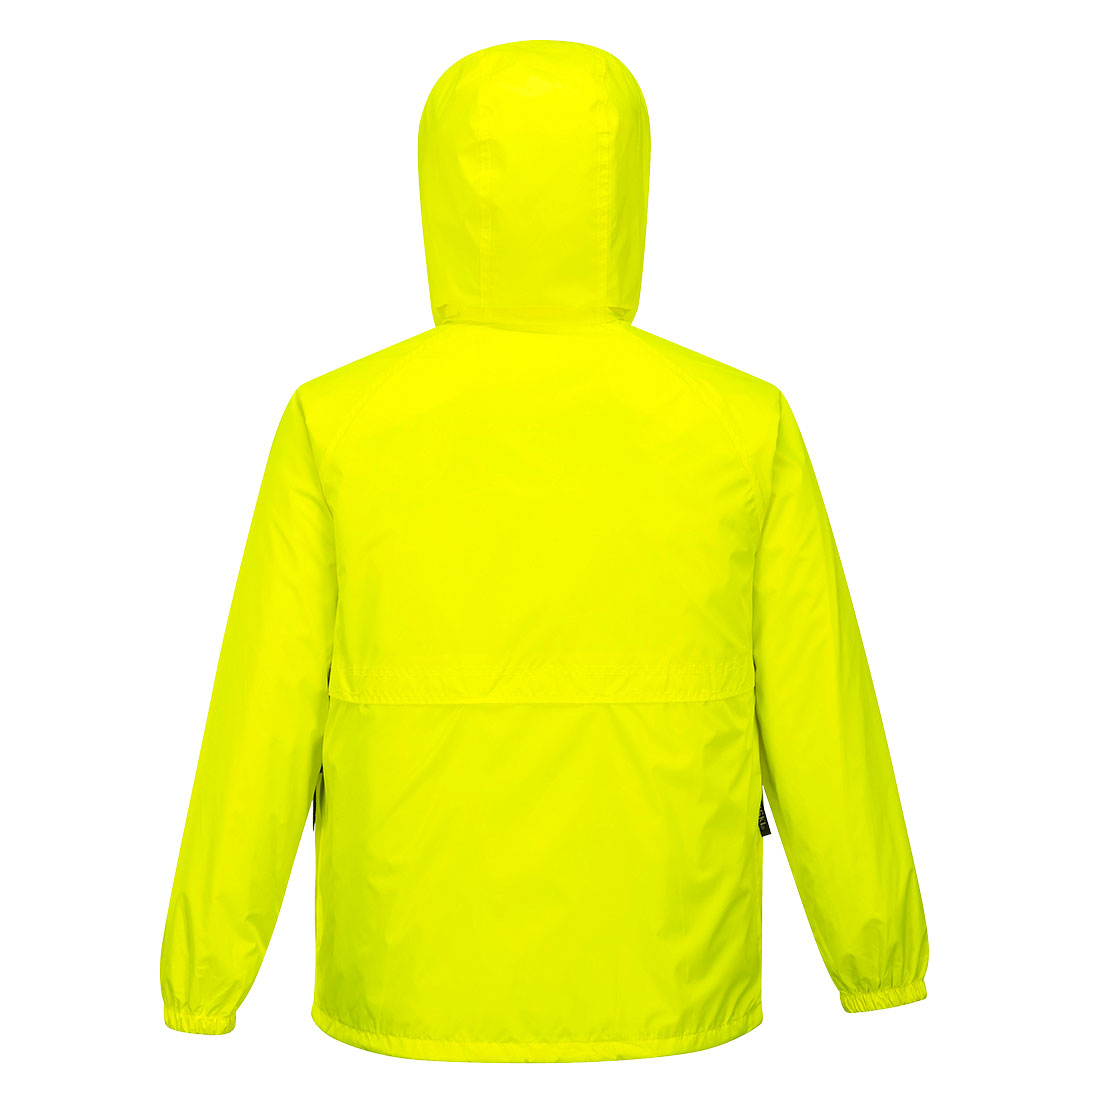 HUSKI STRATUS JACKET a packable fully lined jacket